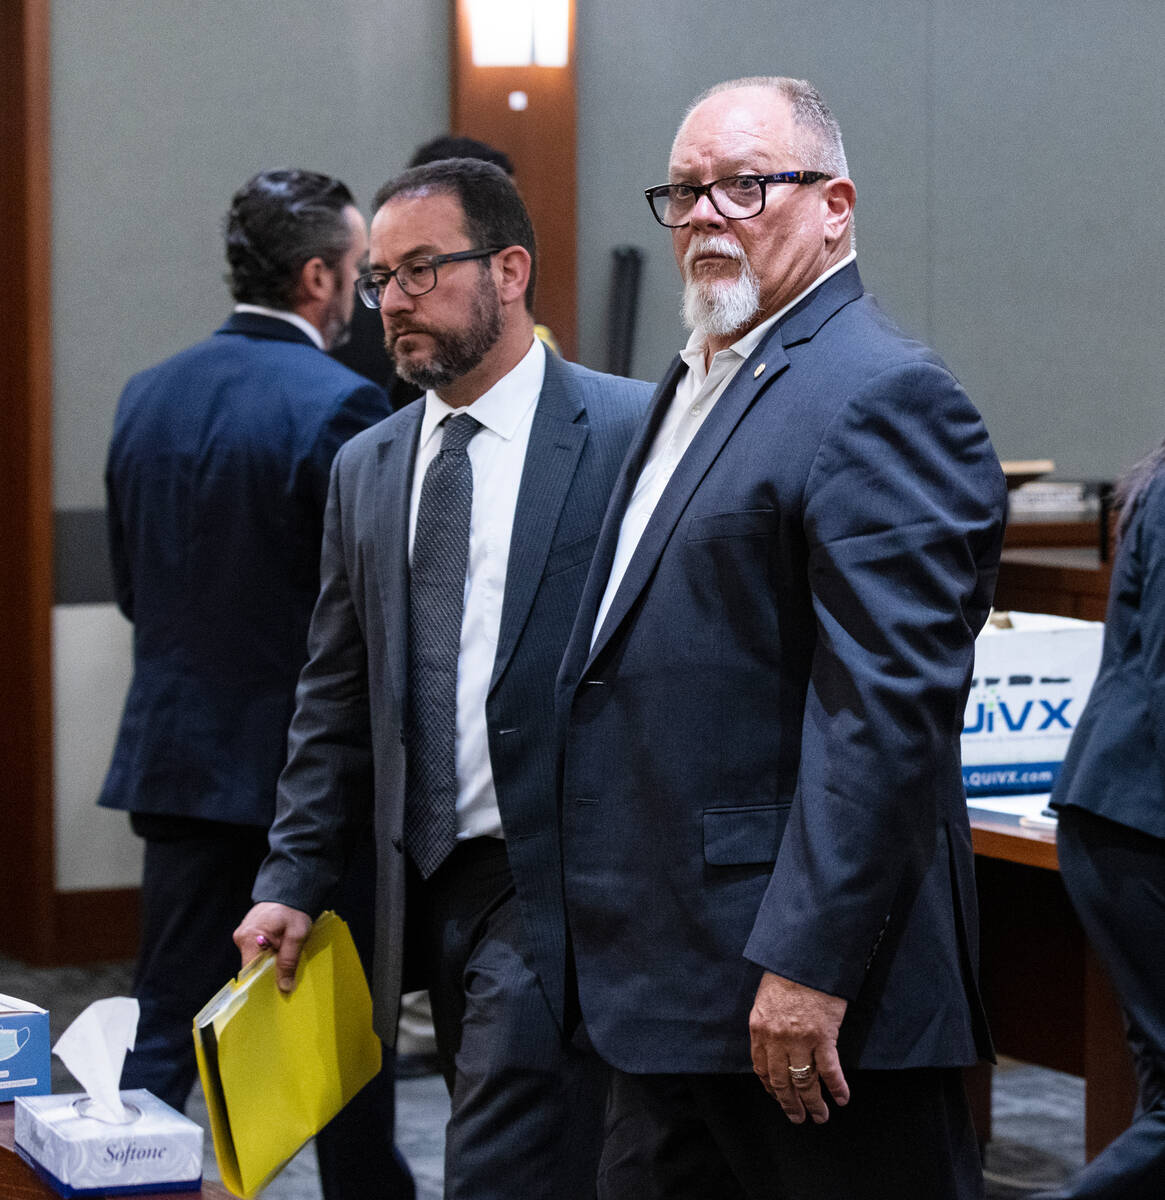 Richard Devries, 66, right, appears in court with his attorney Richard Schonfeld on Wednesday, ...